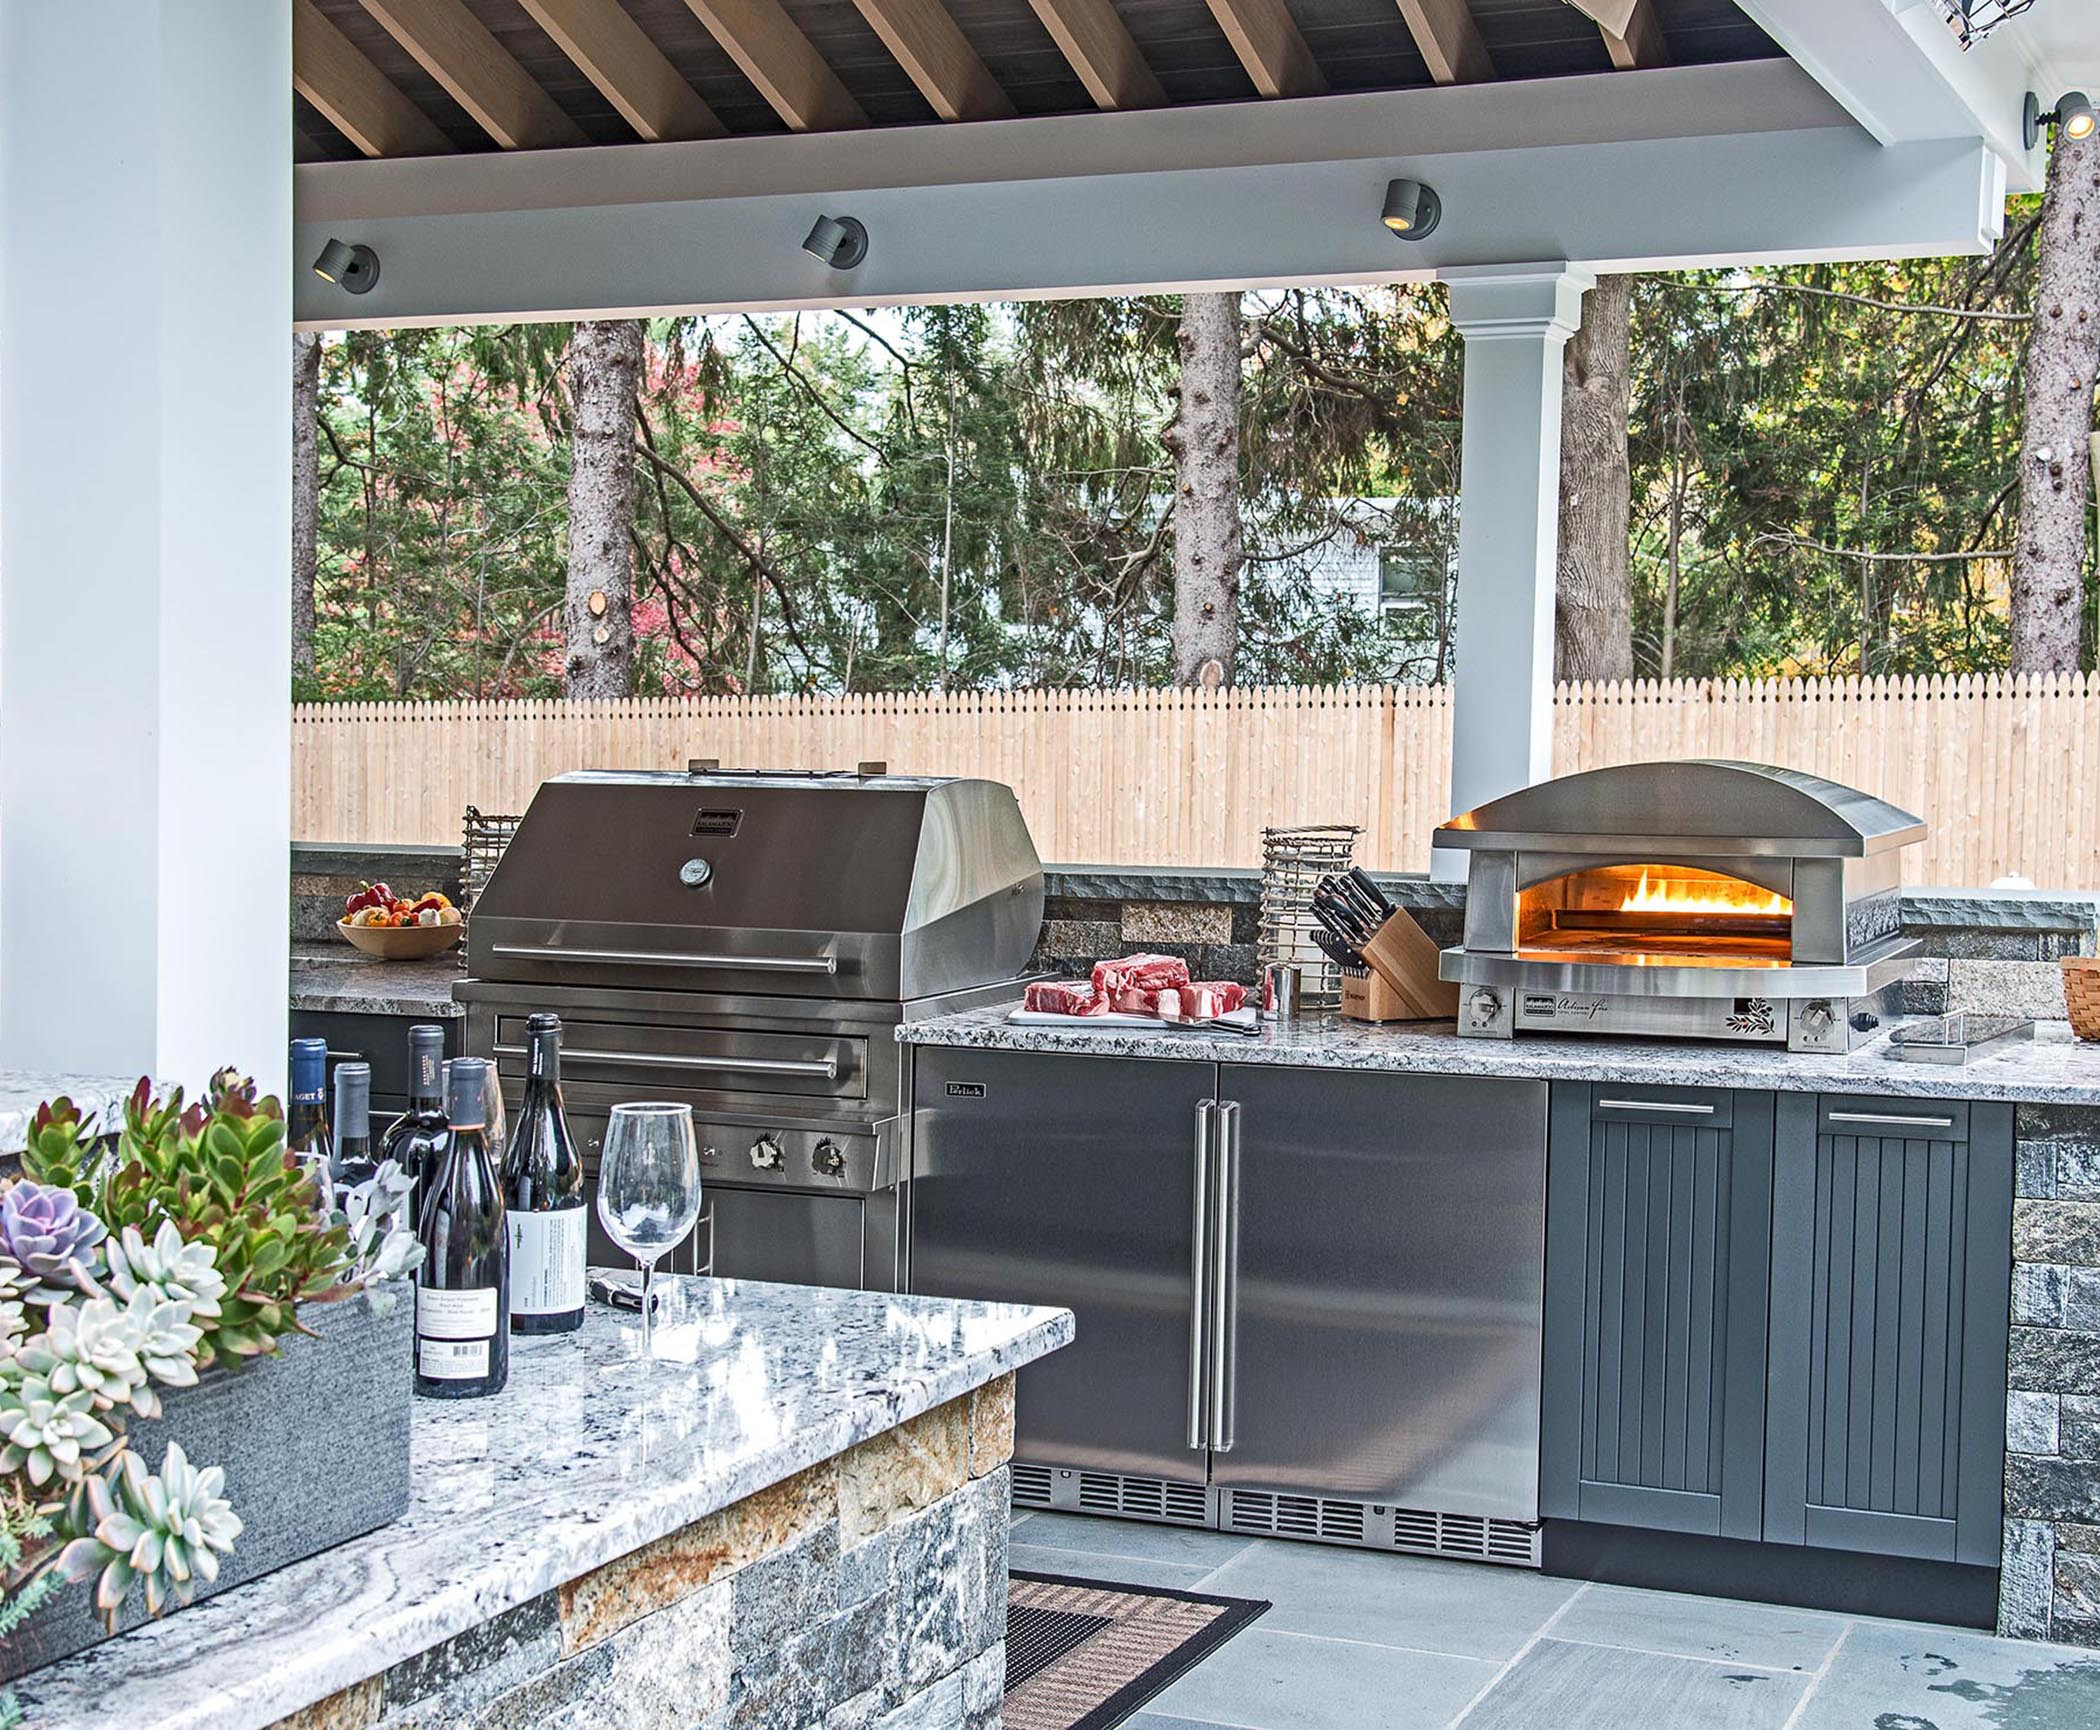 Outdoor Kitchen Pics
 Outdoor Kitchen for Your Patio Design Build Planners